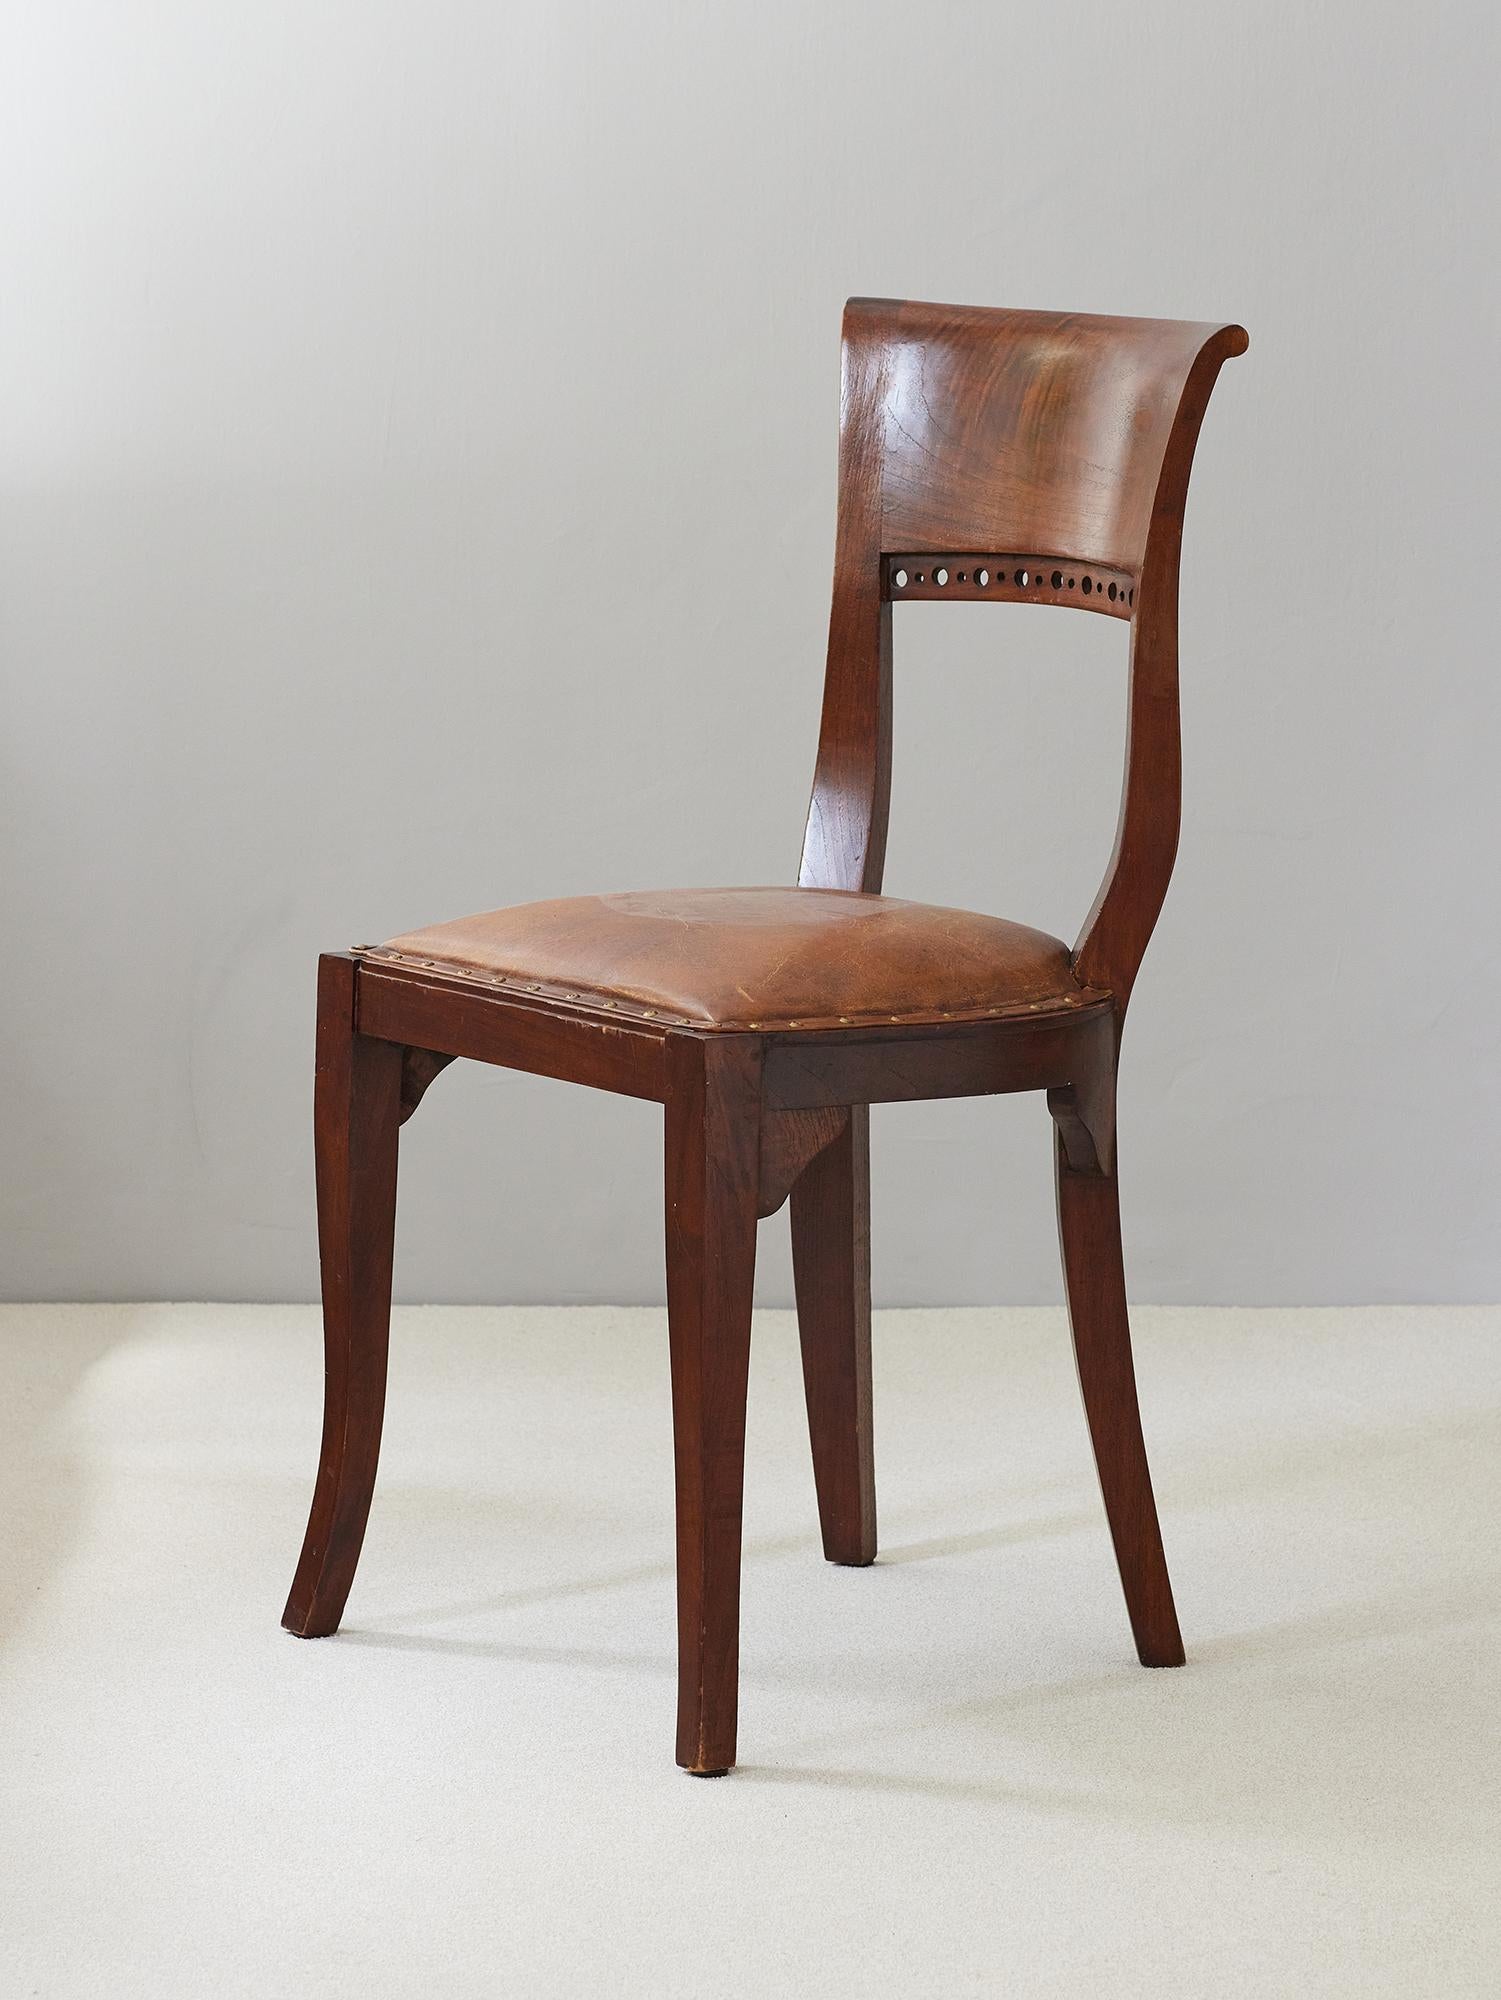 Fine and sculptural pair of Art Nouveau (Jugend) dining chairs upholstered in brown leather. Ca 1920's Sweden.